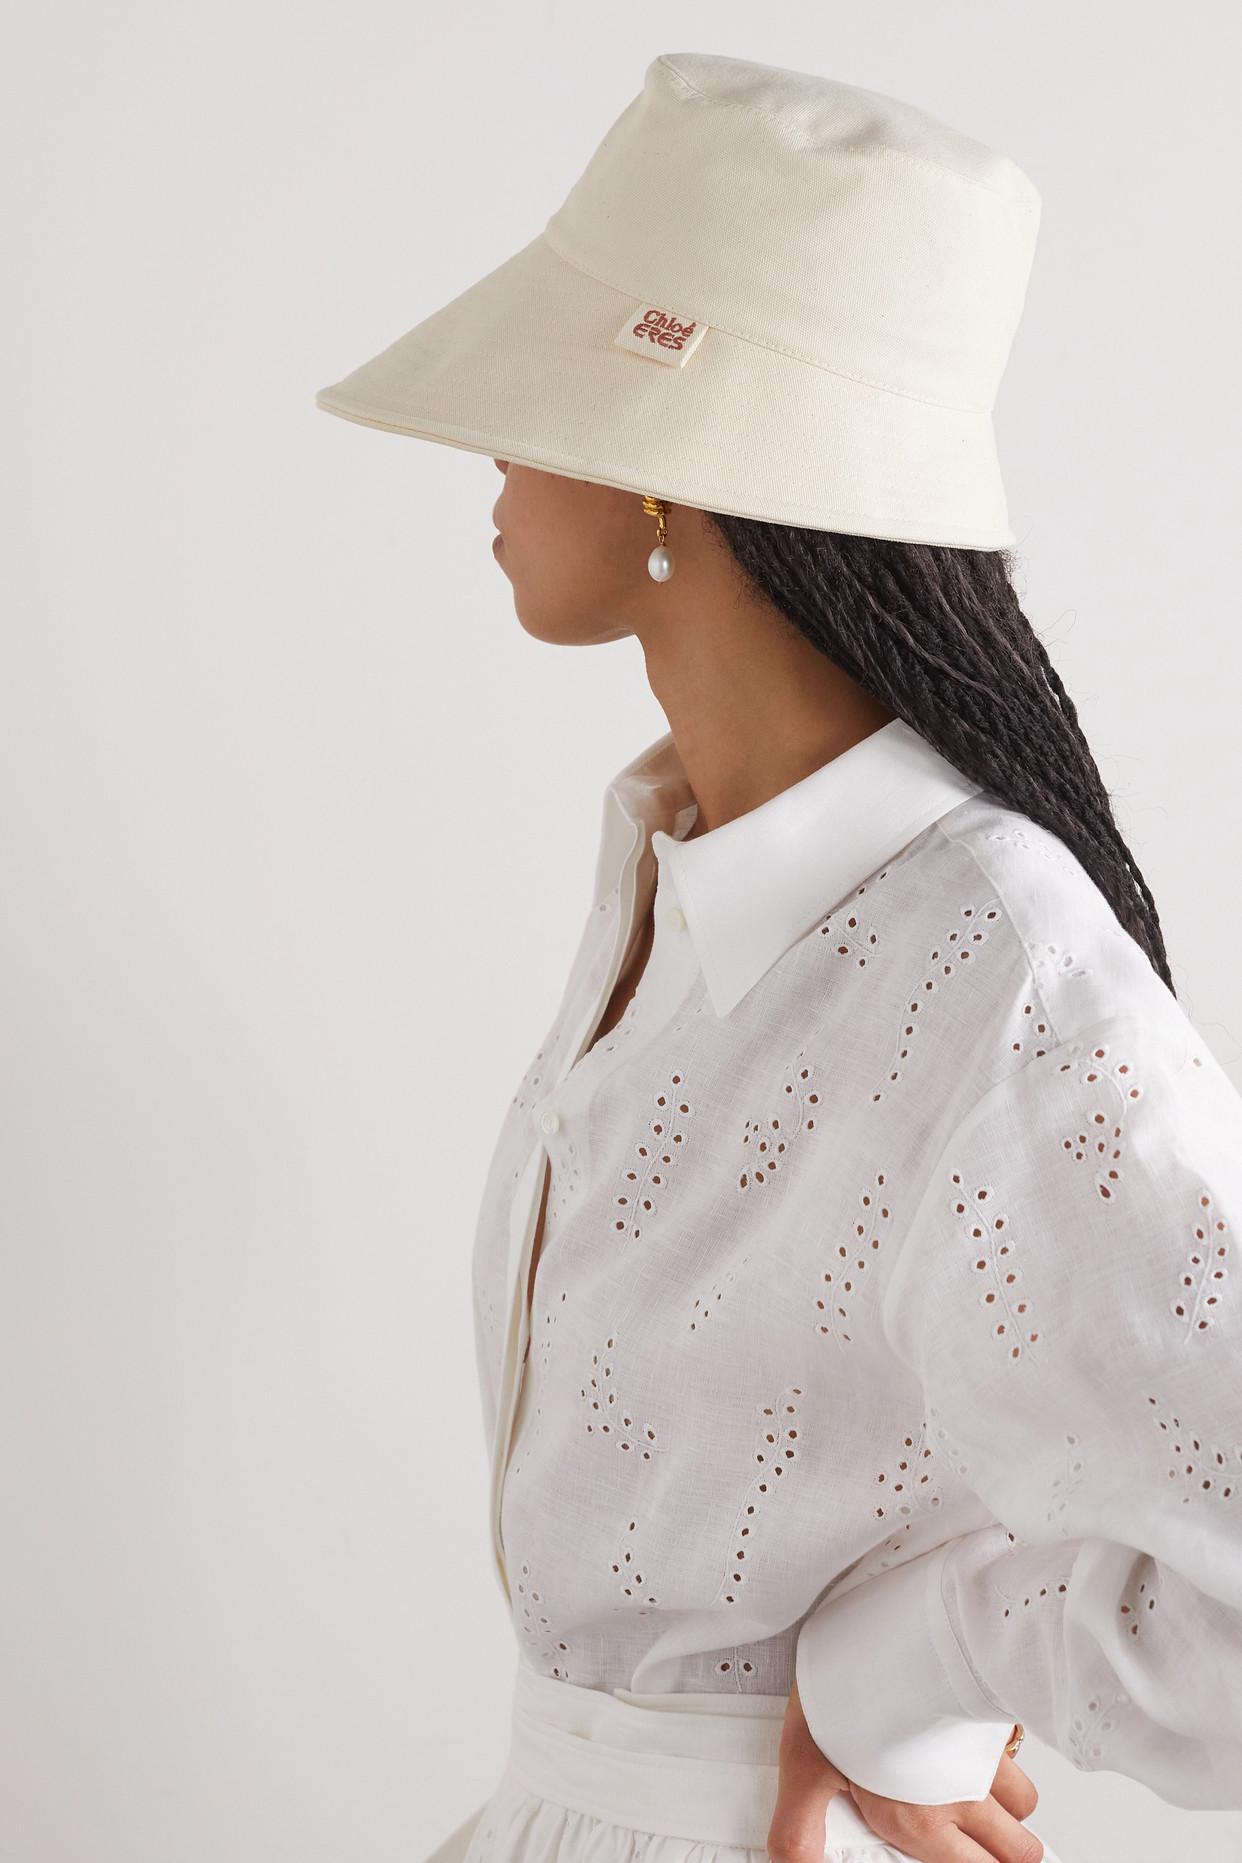 Chloé + Net Sustain + Eres Recycled-cotton Canvas Bucket Hat in